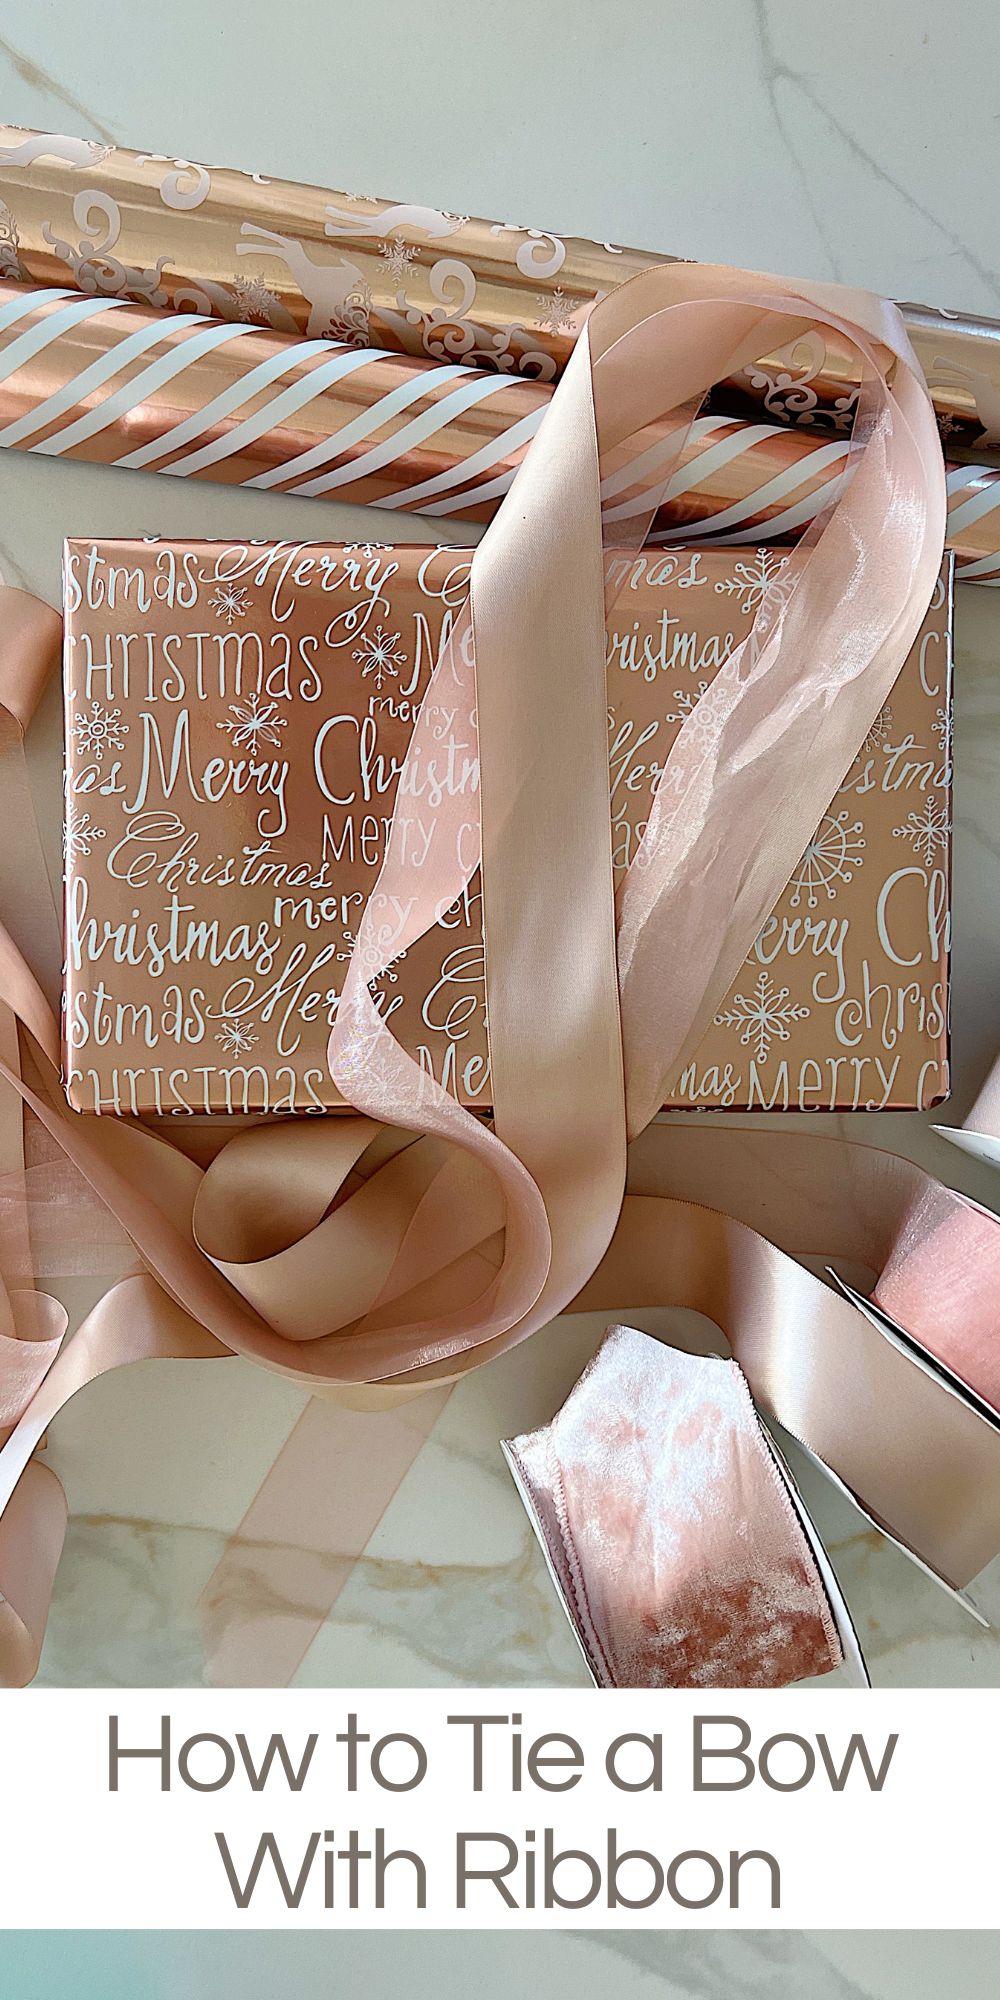 13 Ways to Craft With Ribbon